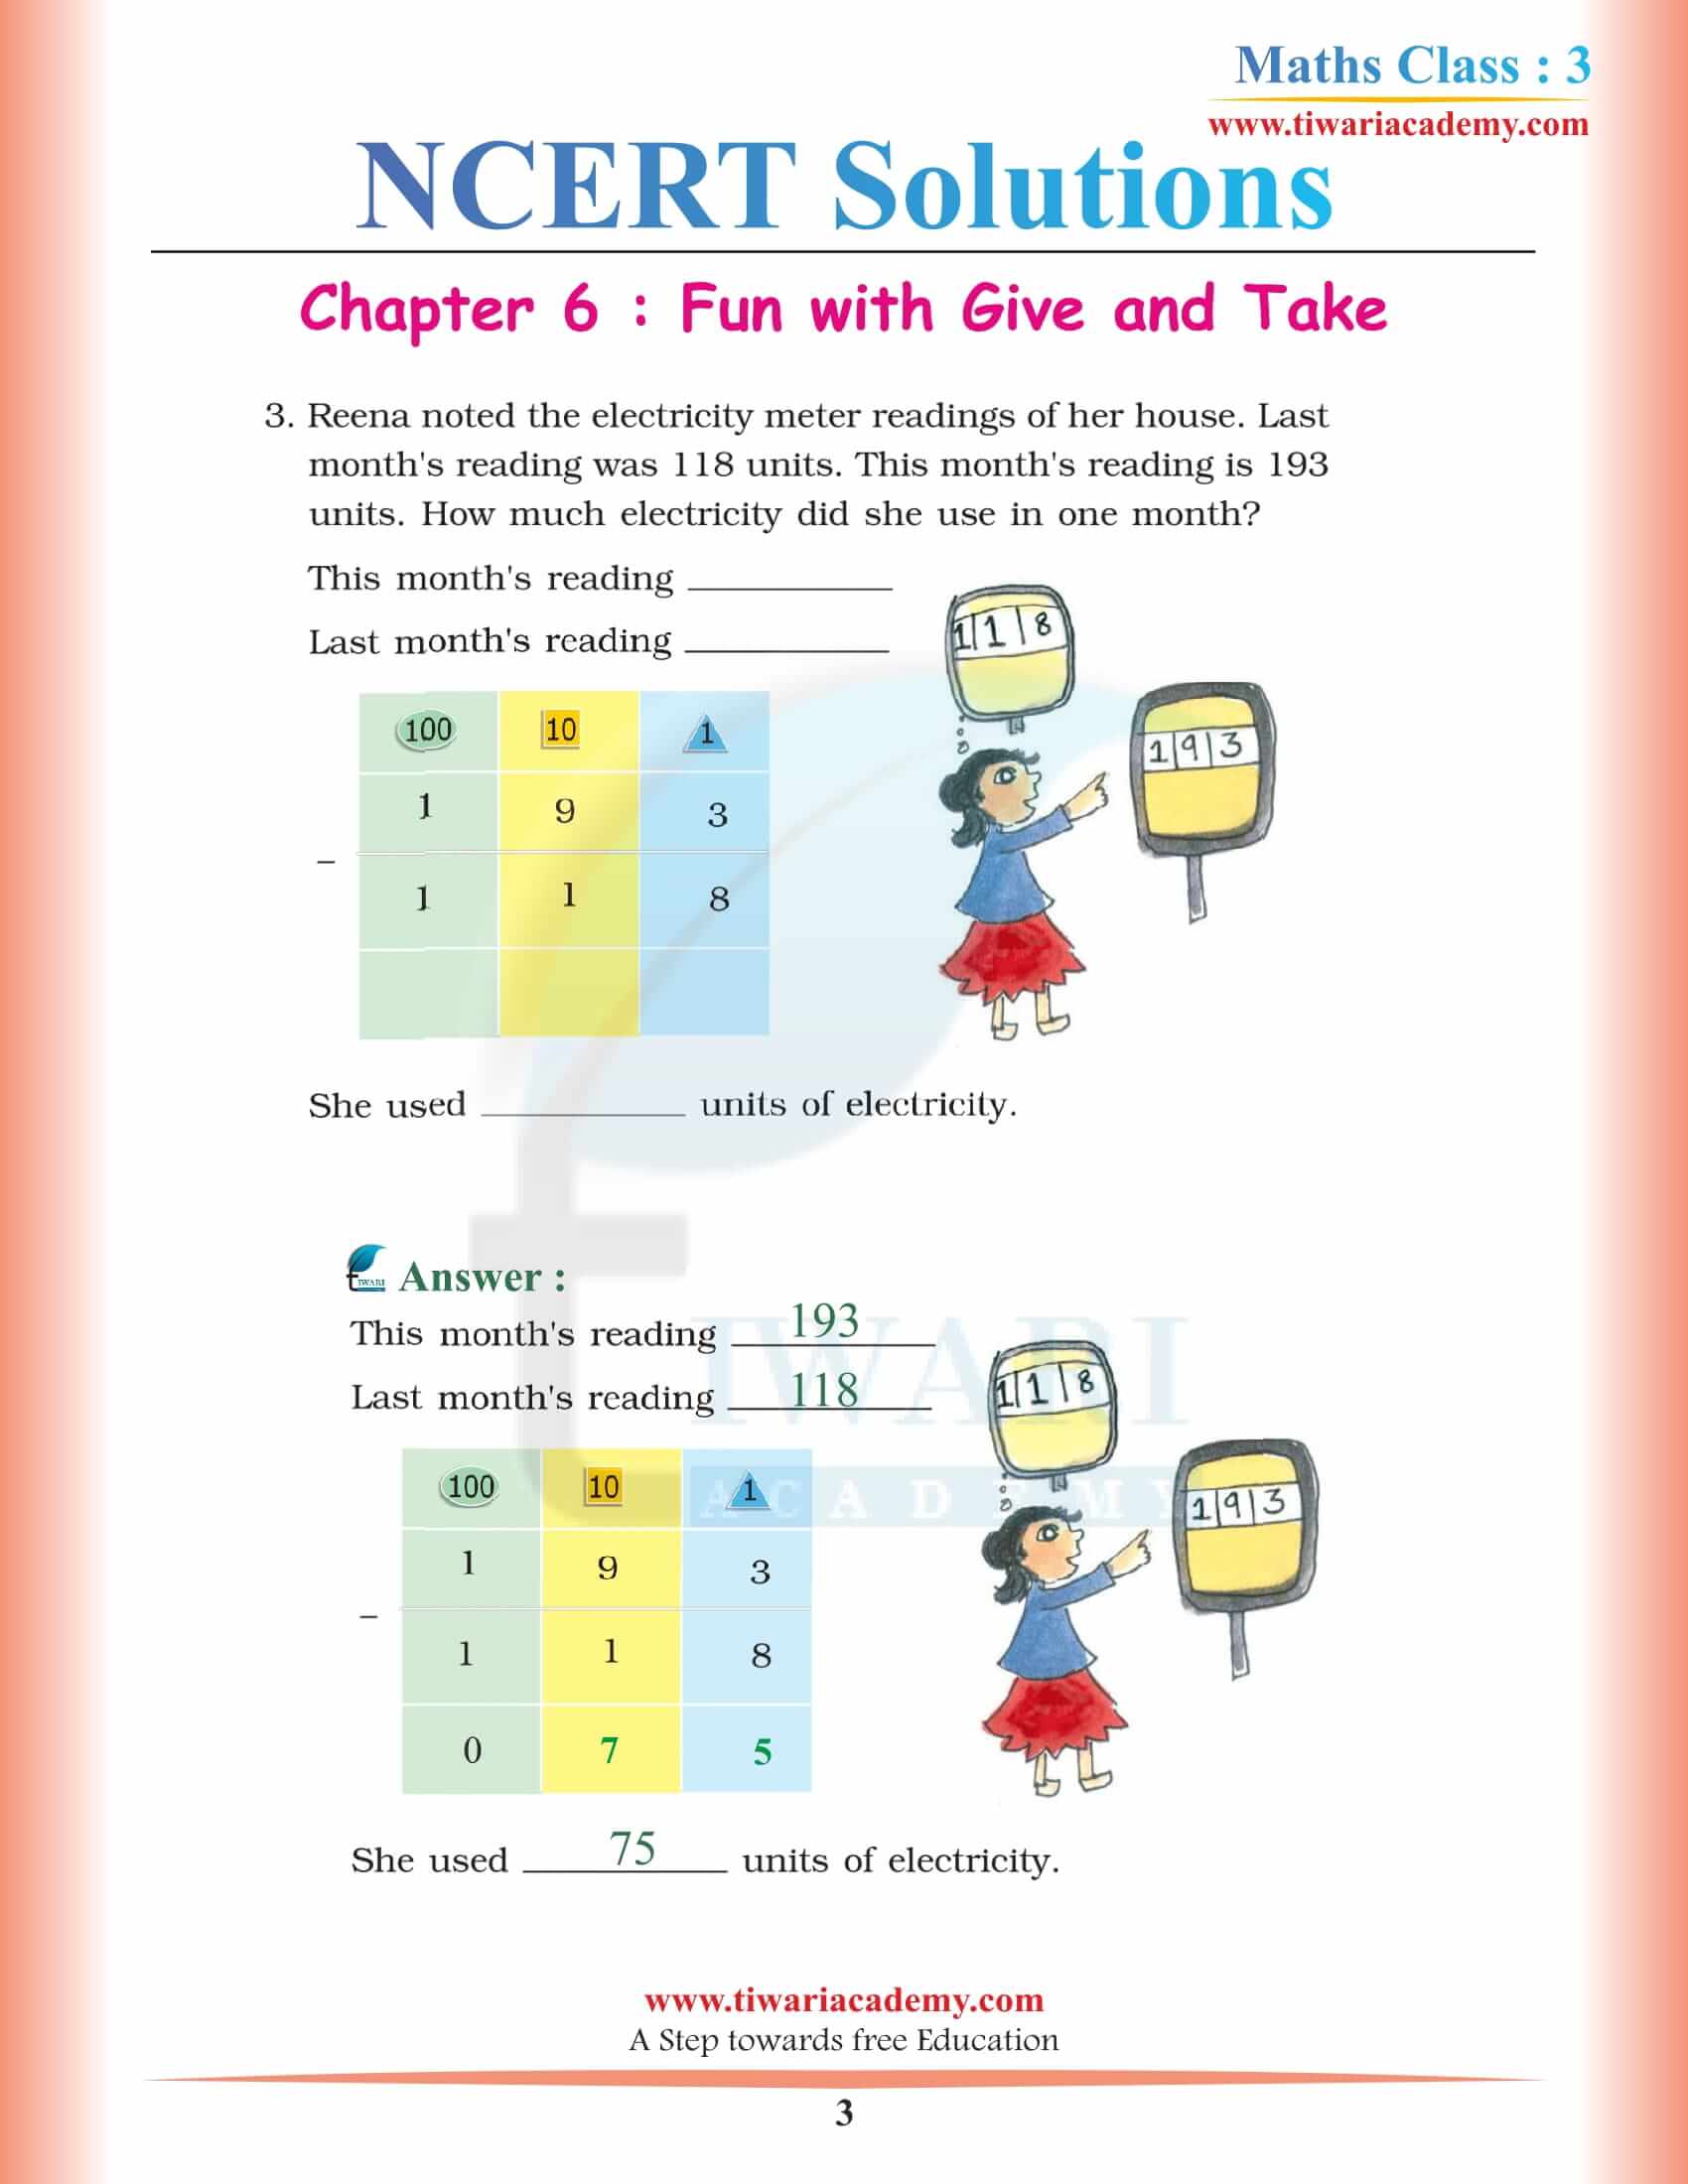 NCERT Solutions for Class 3 Maths Chapter 6 Fun with Give and Take free download